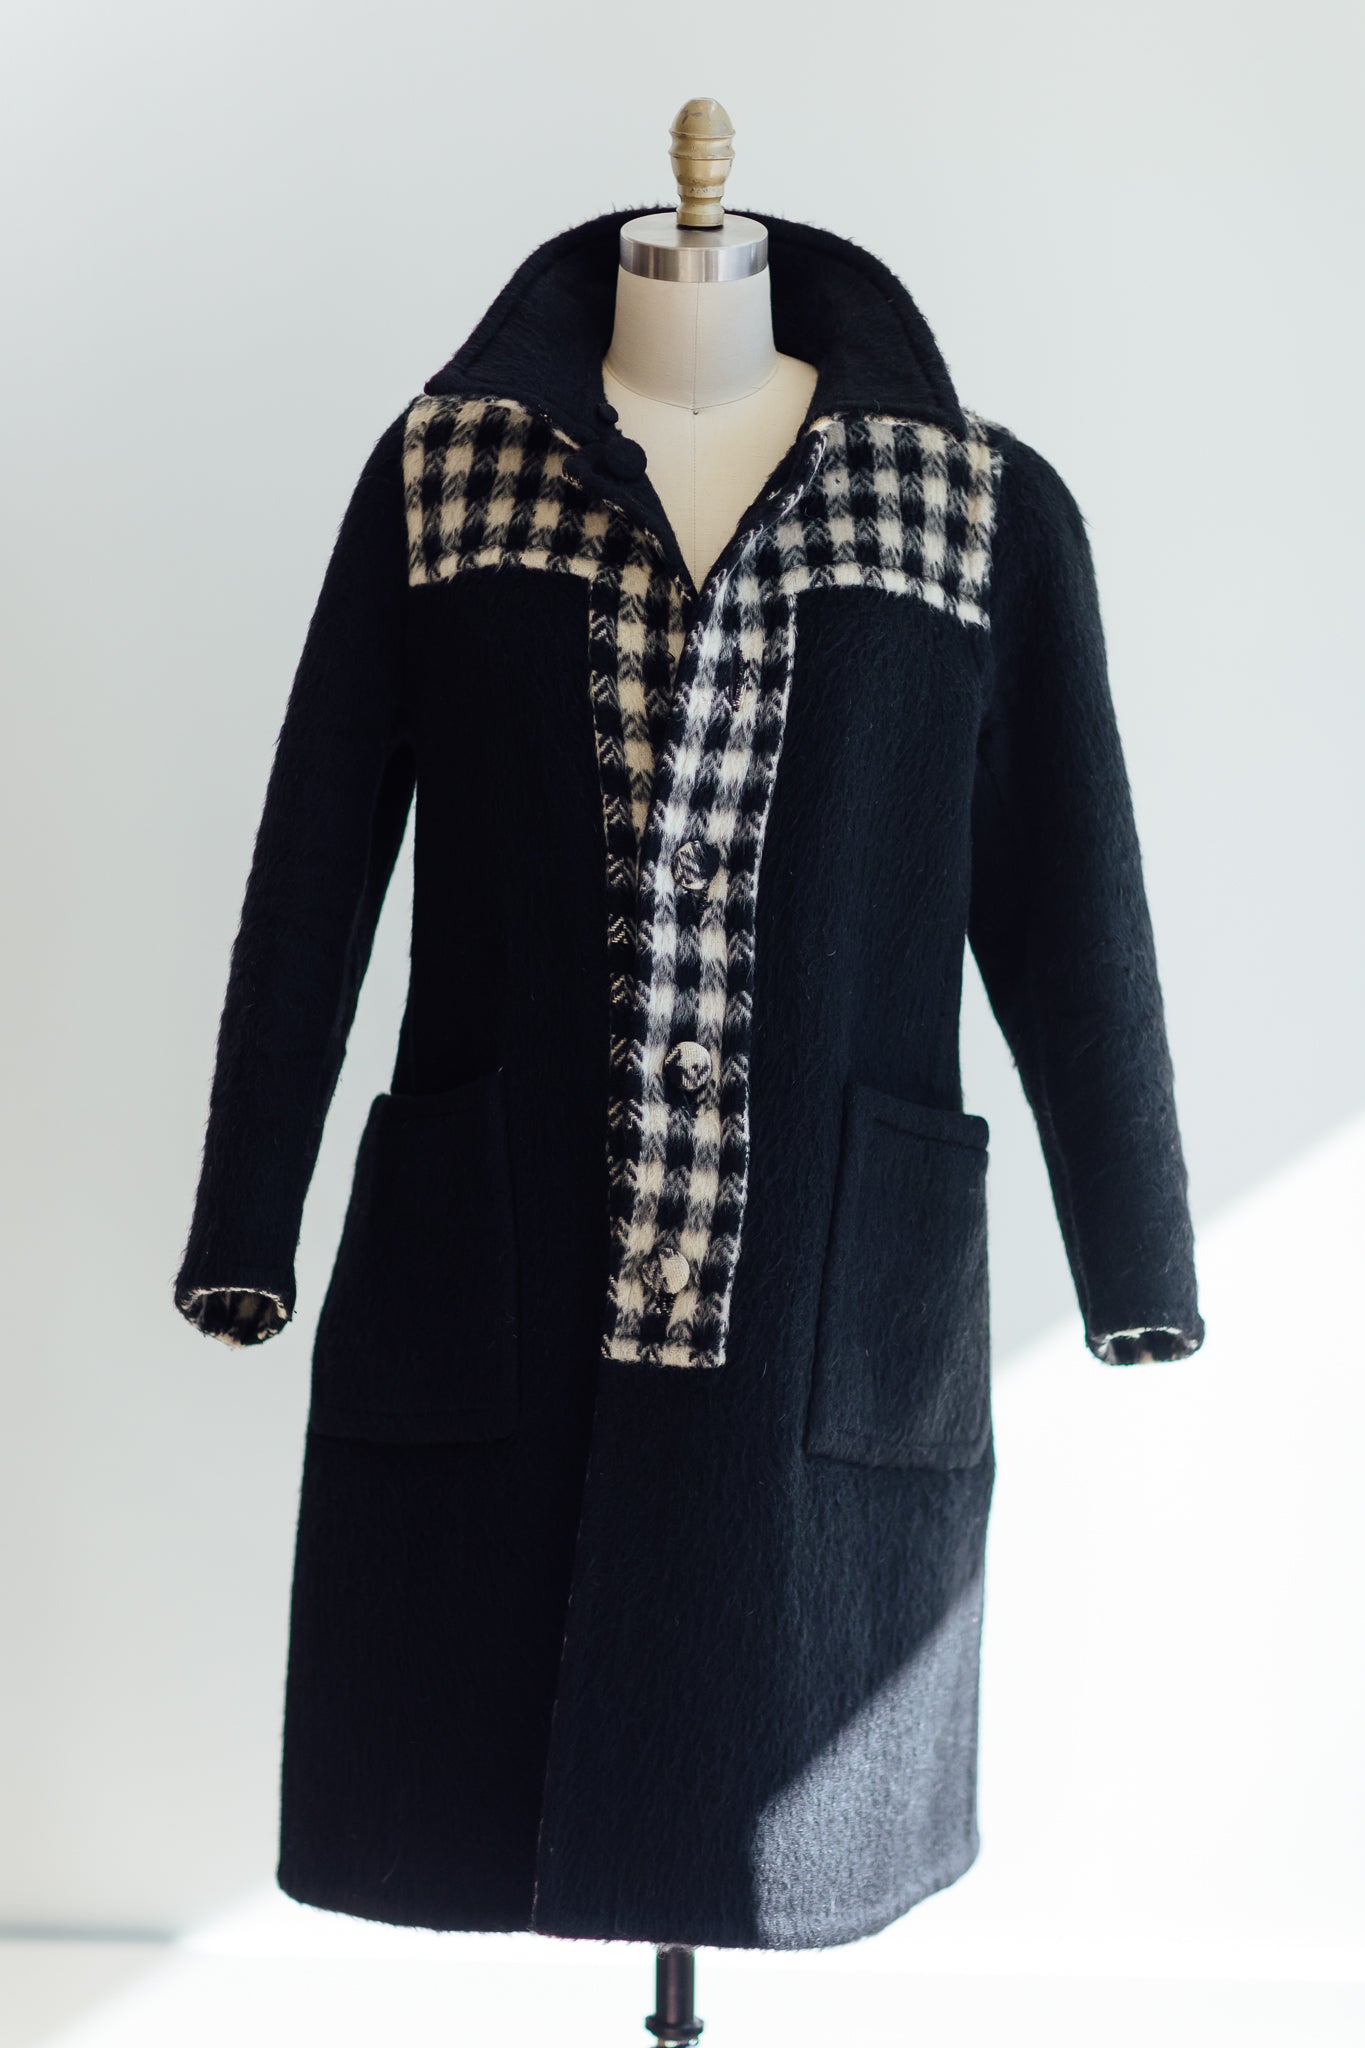 Black and White Check Reversible Mohair Coat